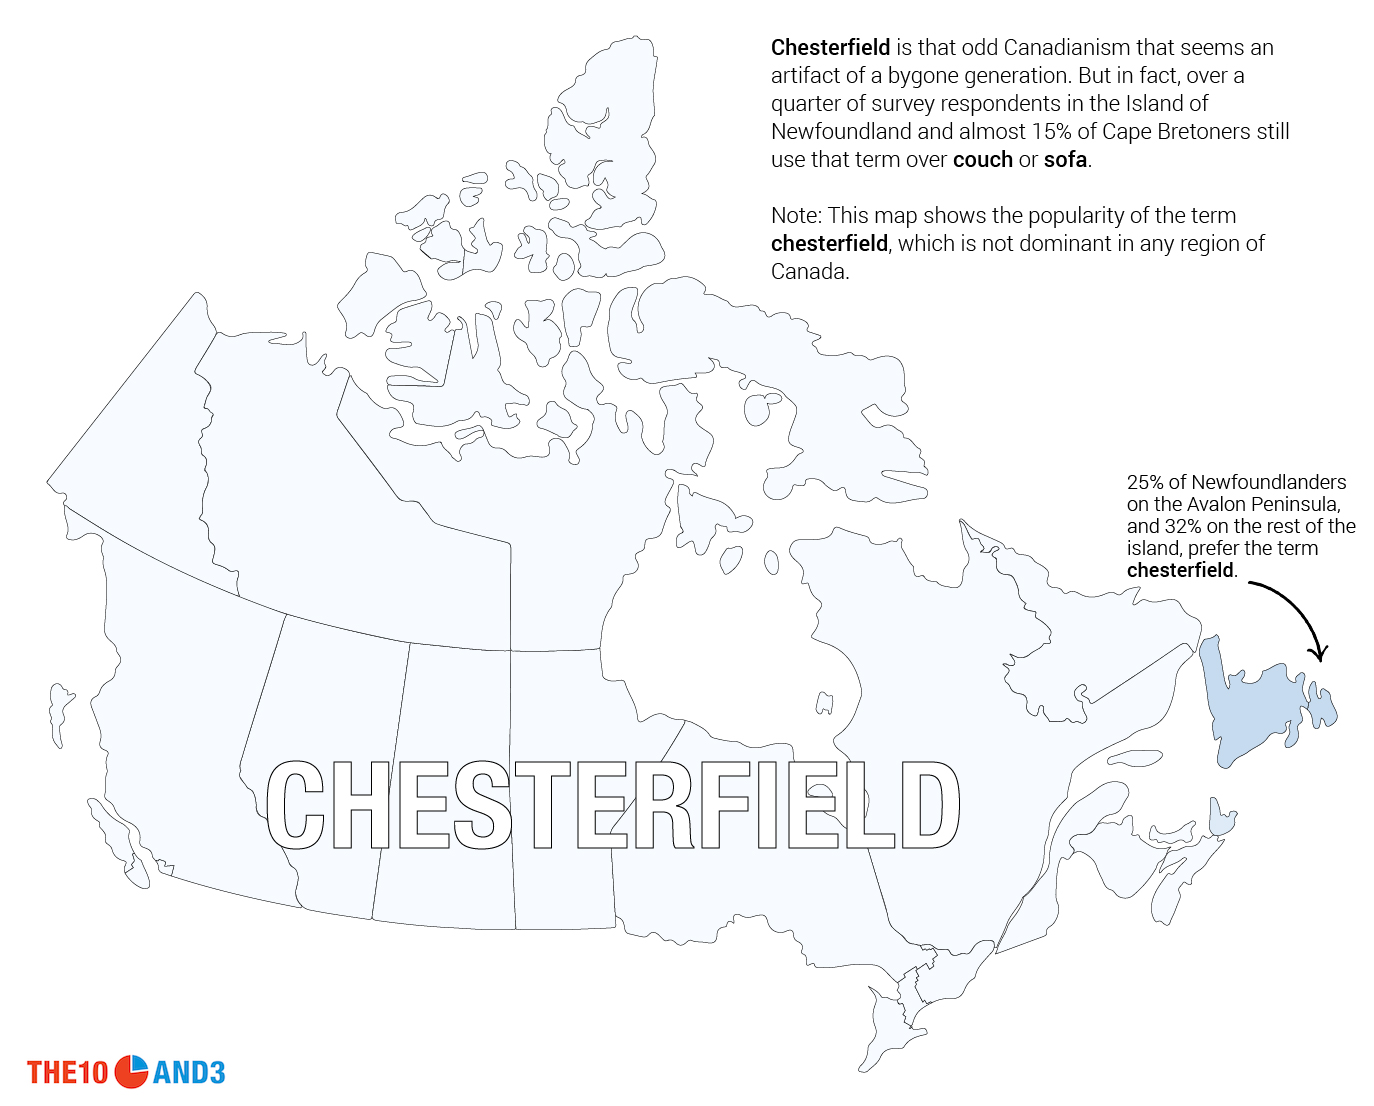 Popularity of Chesterfield